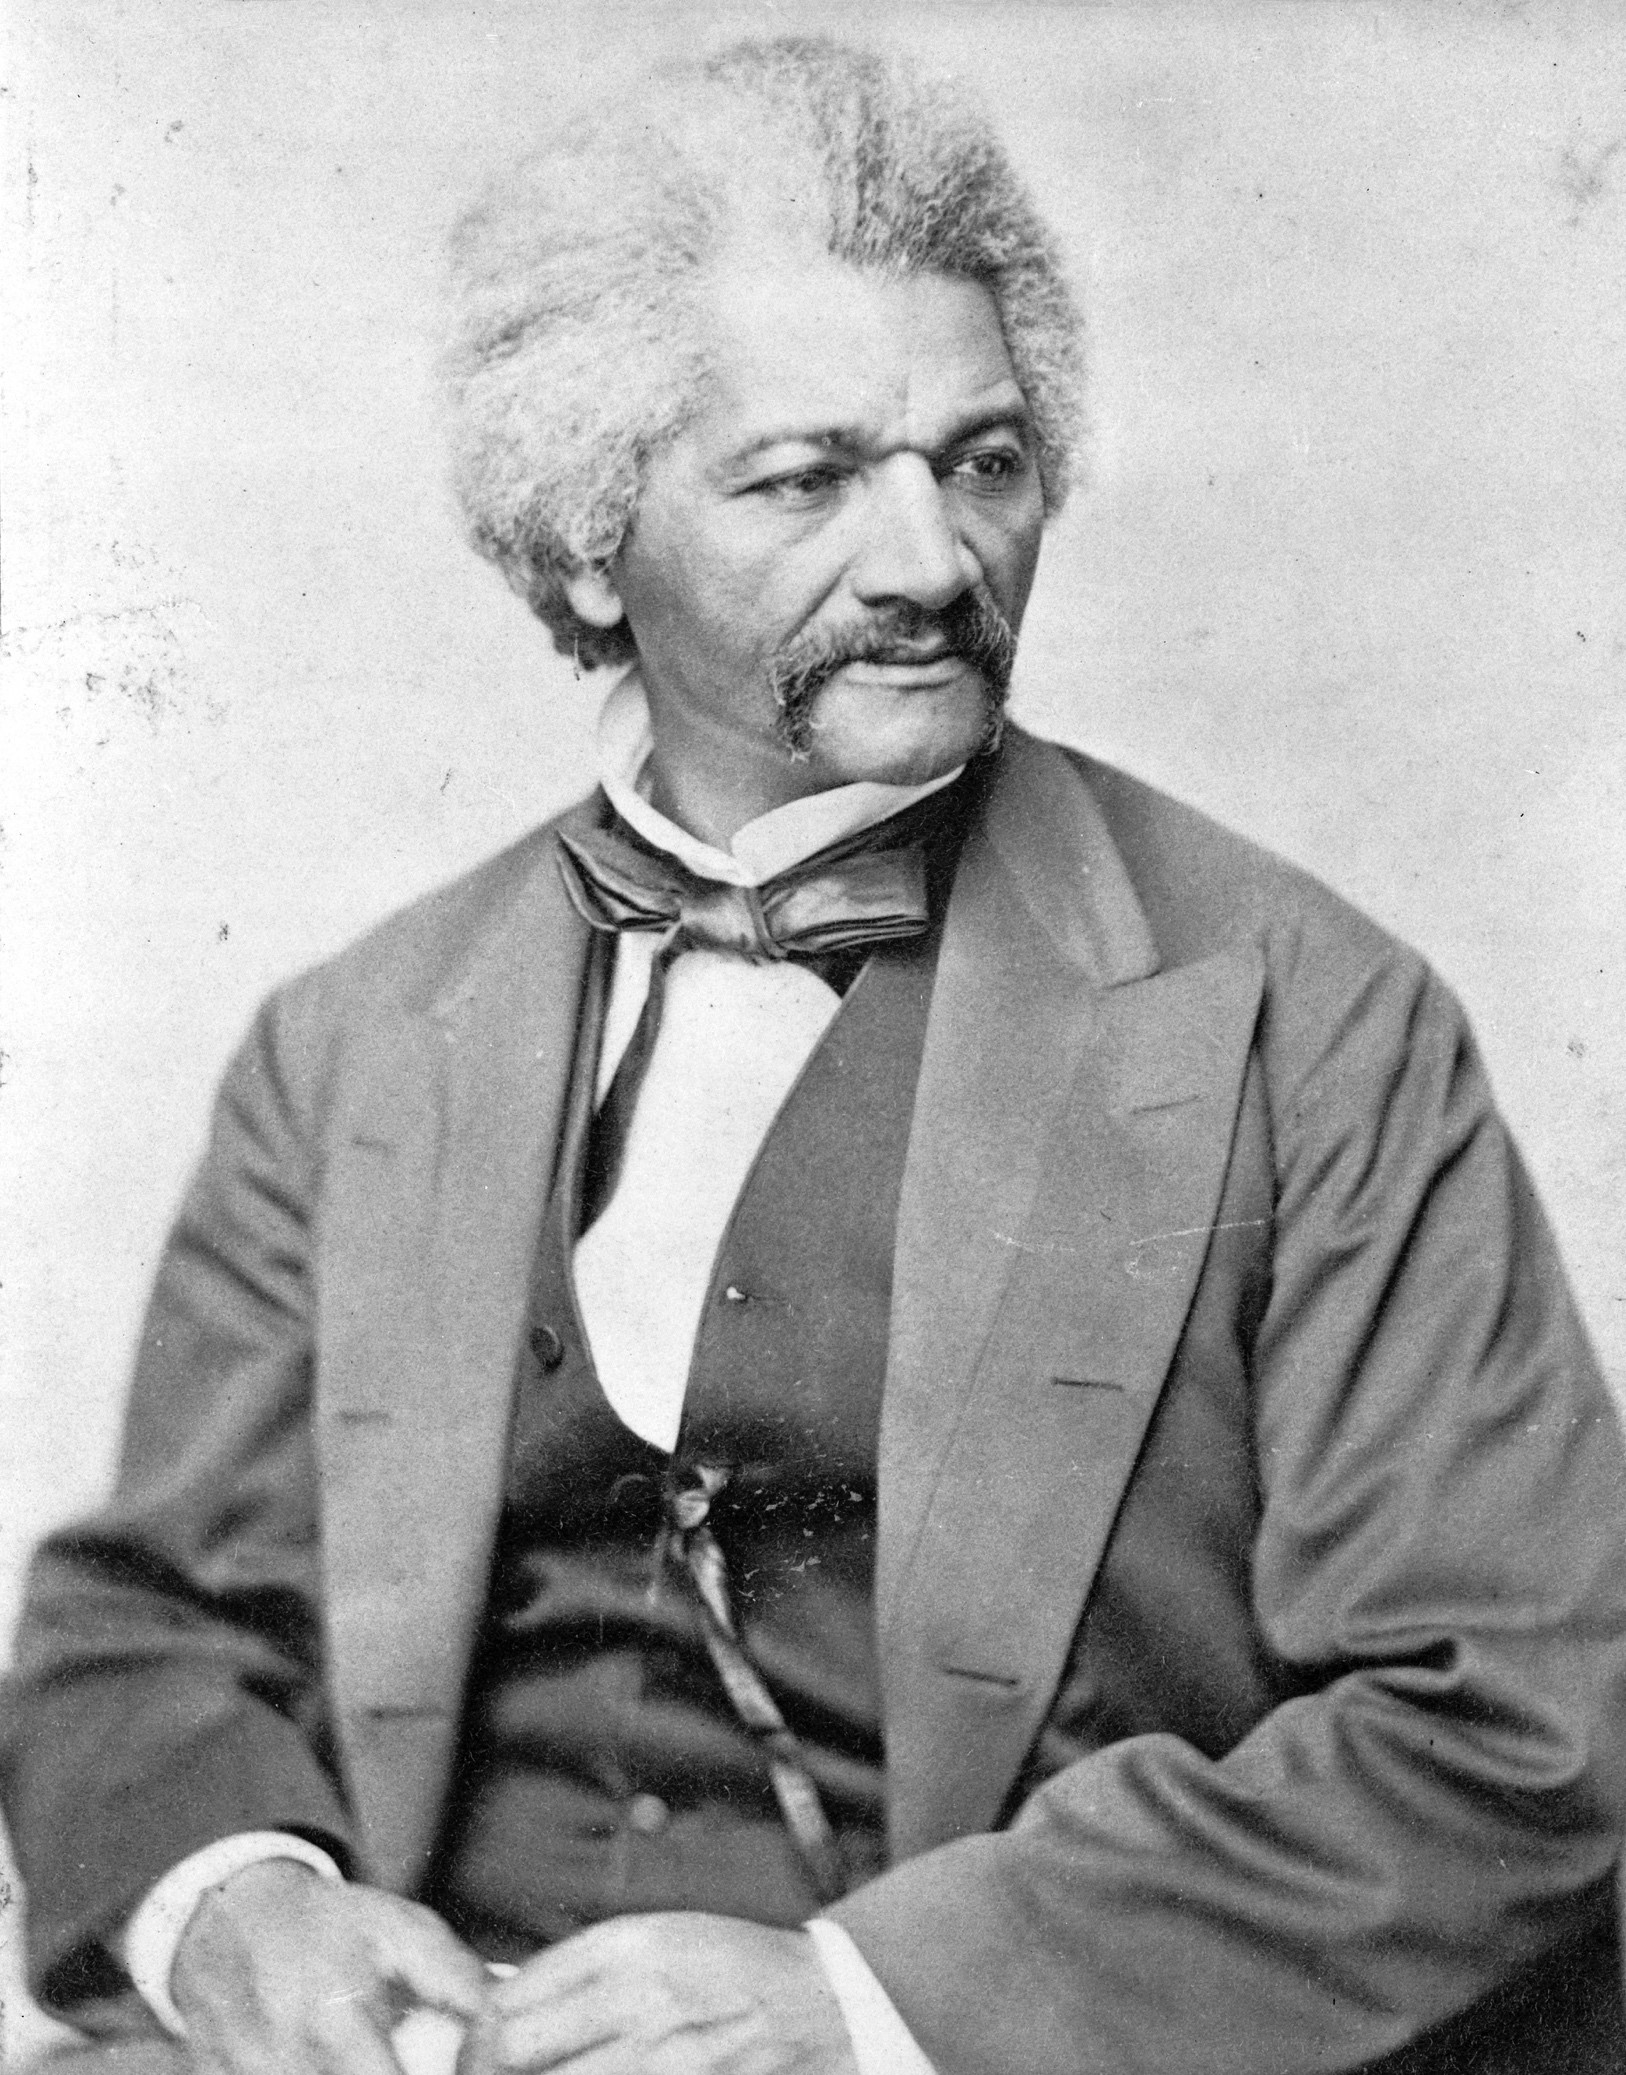 Abolitionist, journalist and author Frederick Douglass. Photo by George Francis Schreiber, April 26, 1870. Prints and Photographs Division, Library of Congress